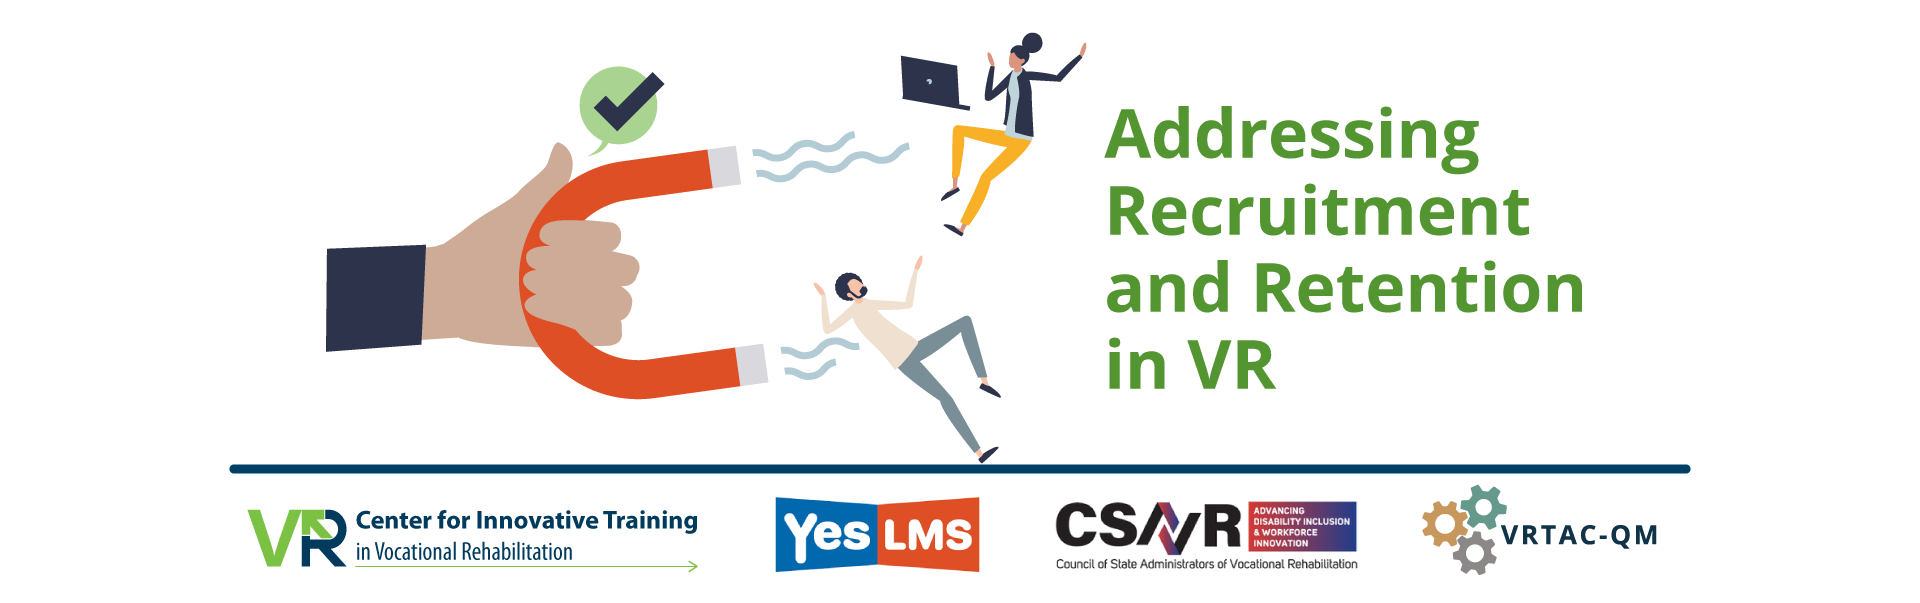 Featured image for “Addressing Recruitment and Retention in VR”